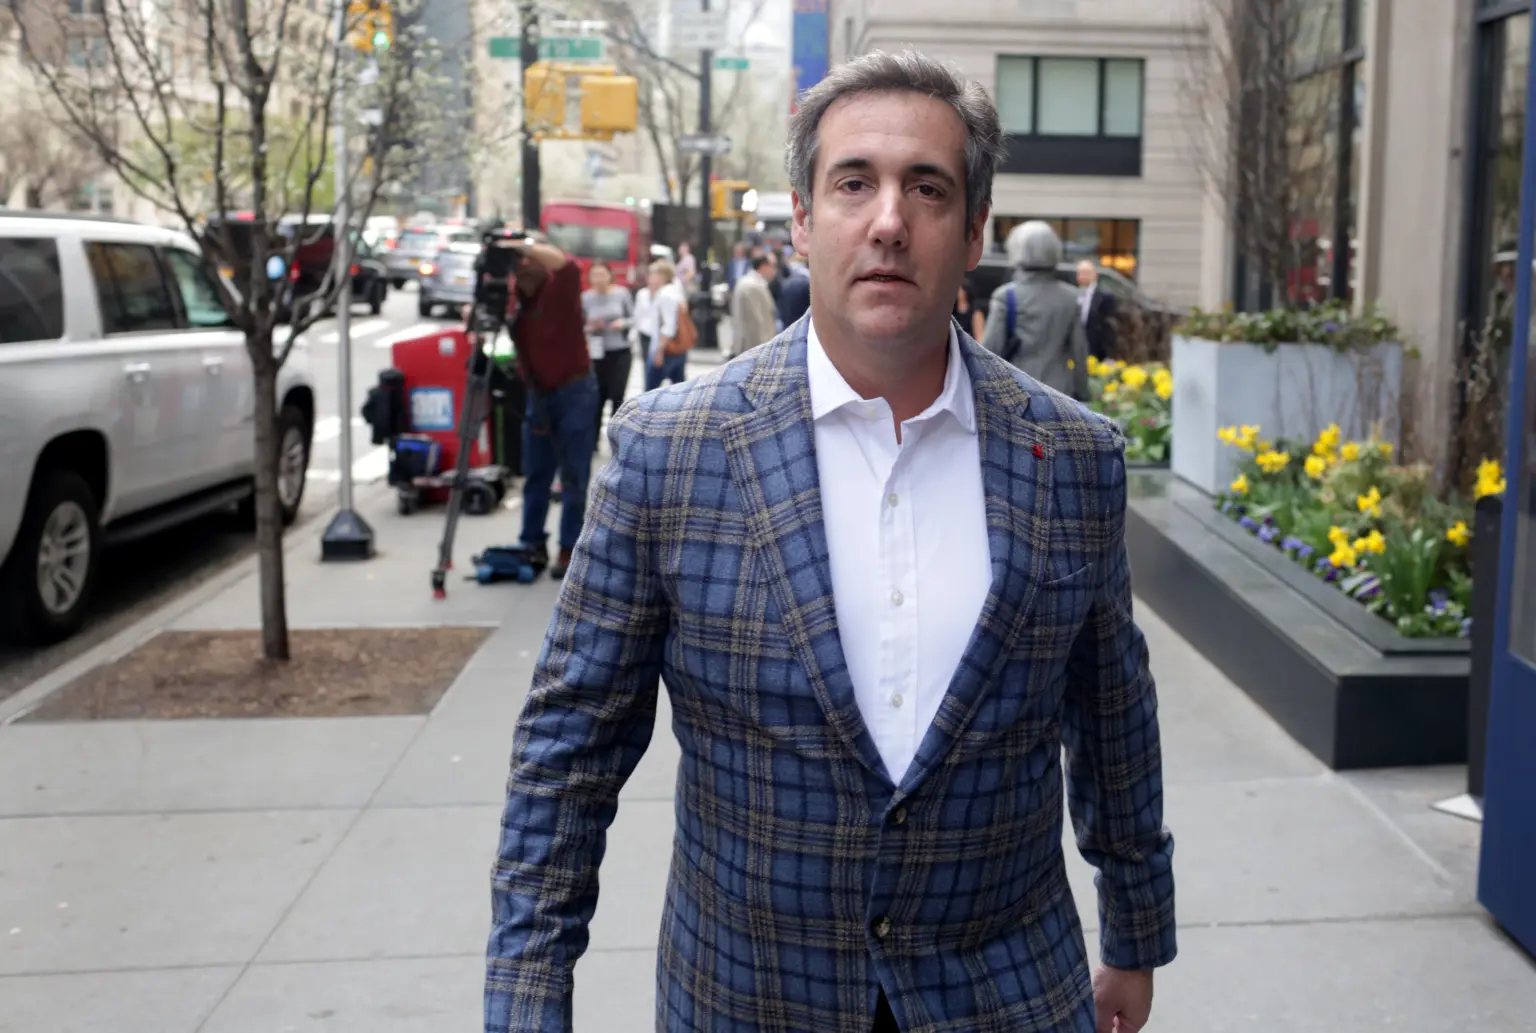 Report: Michael Cohen Plans Run for Congress, and New Book, After Testifying Against Former Boss, Donald Trump